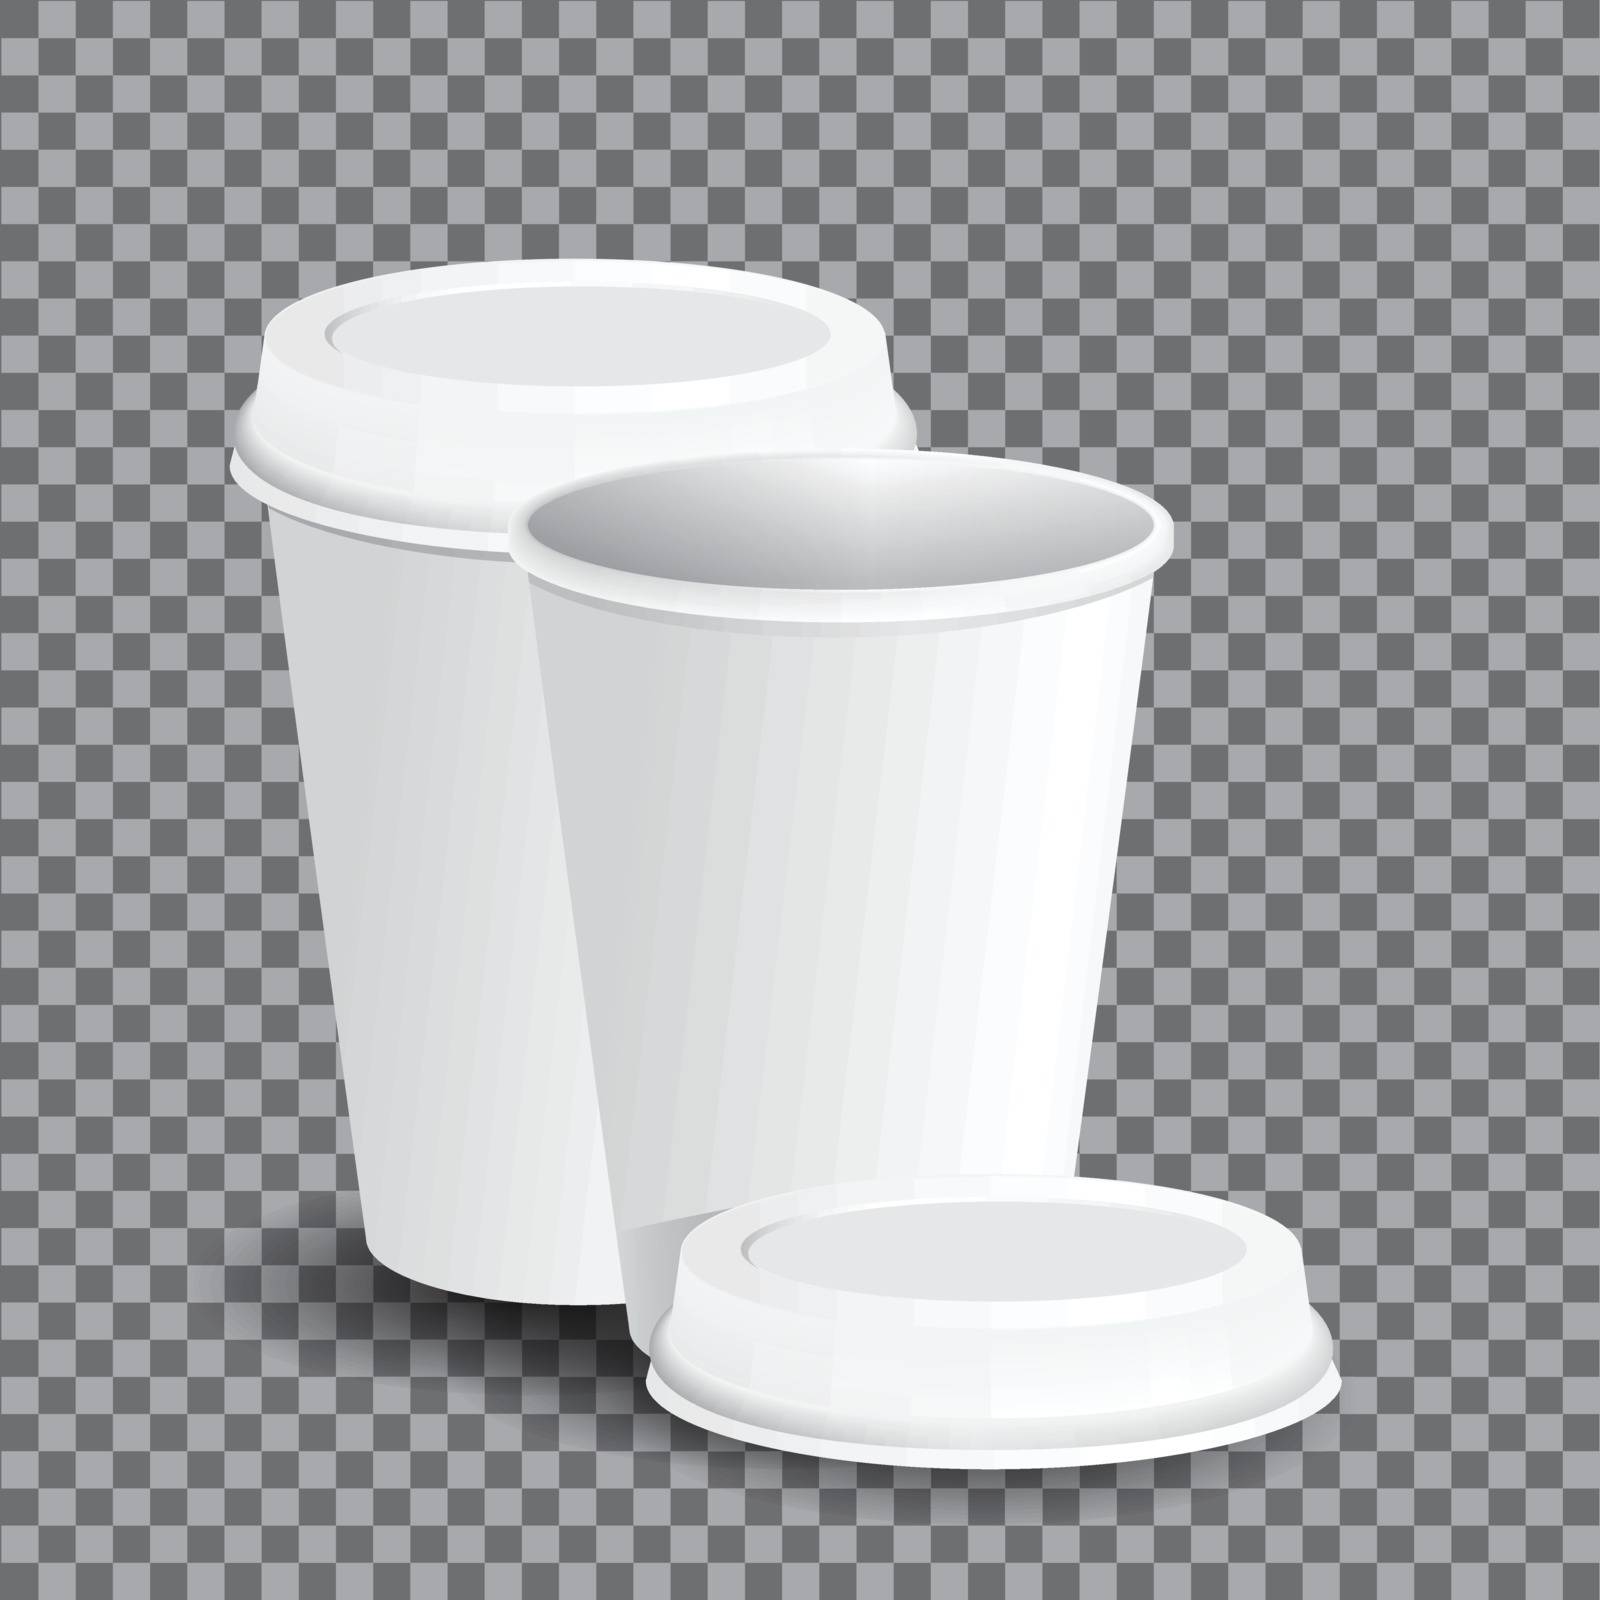 Coffee Cup Isolated on Transparency Grid Background. Photorealistic Vector, Paper Coffee Cup Mockup- vector illustration.